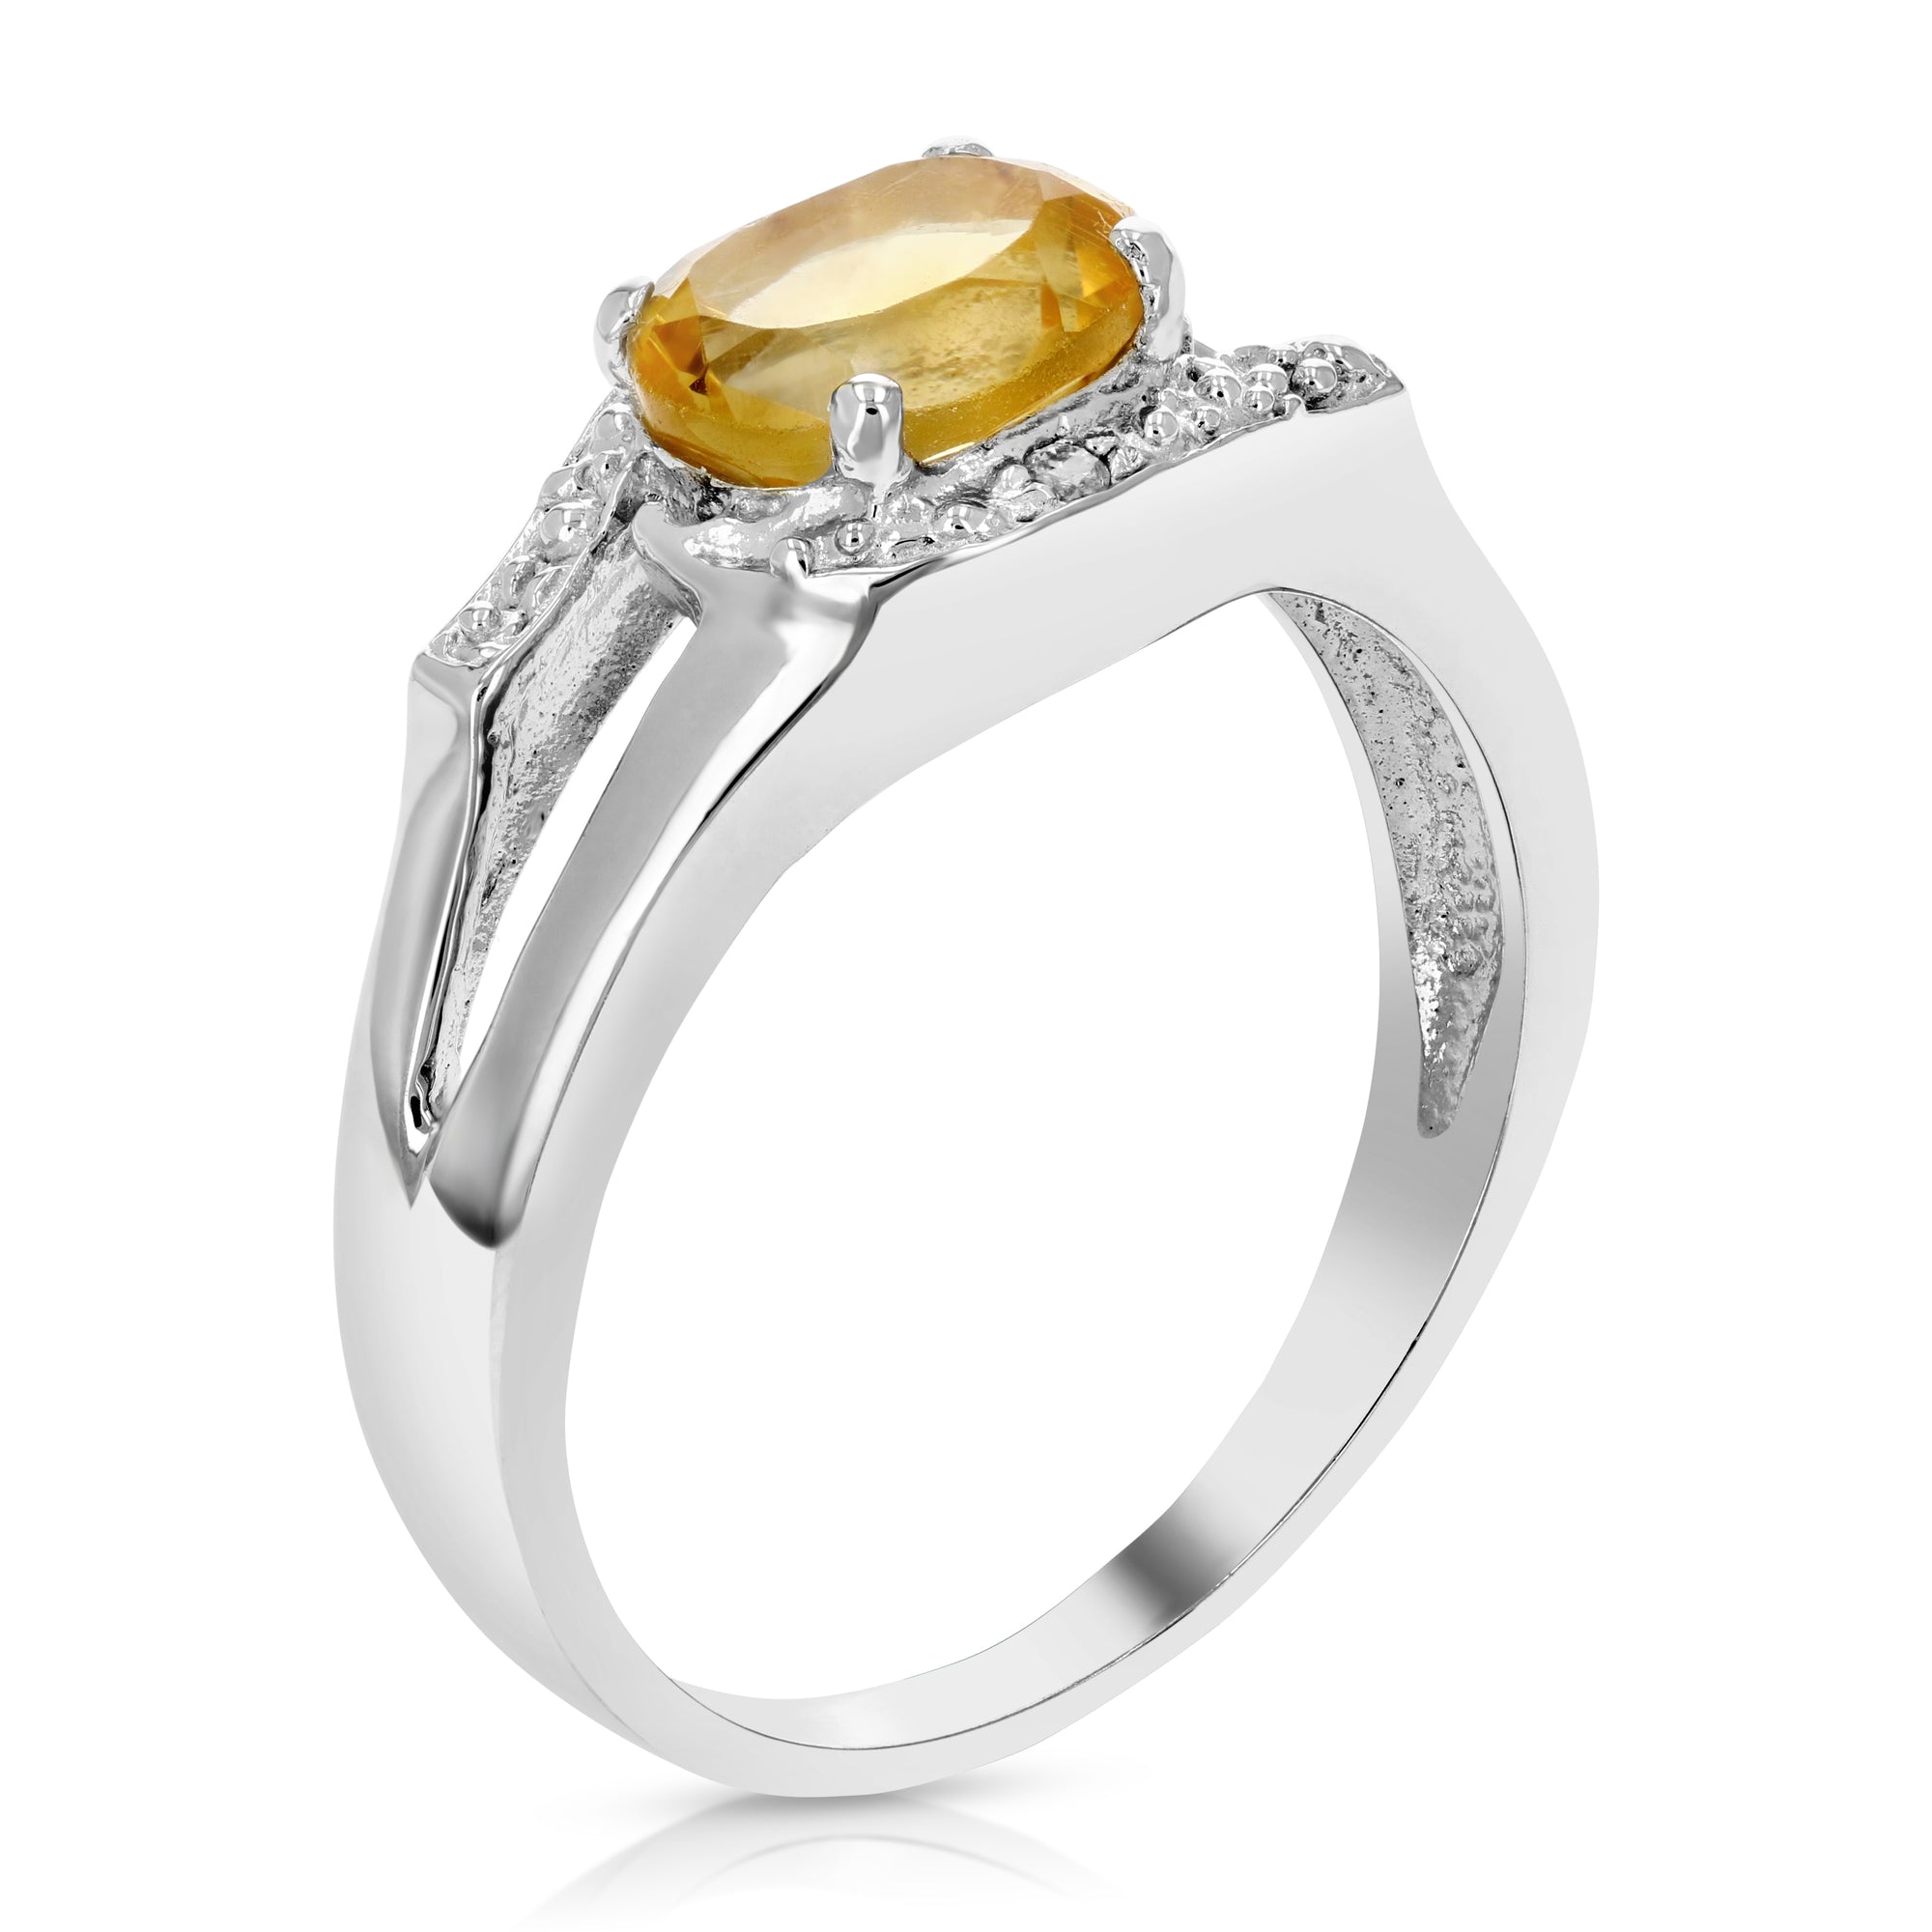 1.20 cttw Oval Shape Citrine Ring in .925 Sterling Silver with Rhodium Plating